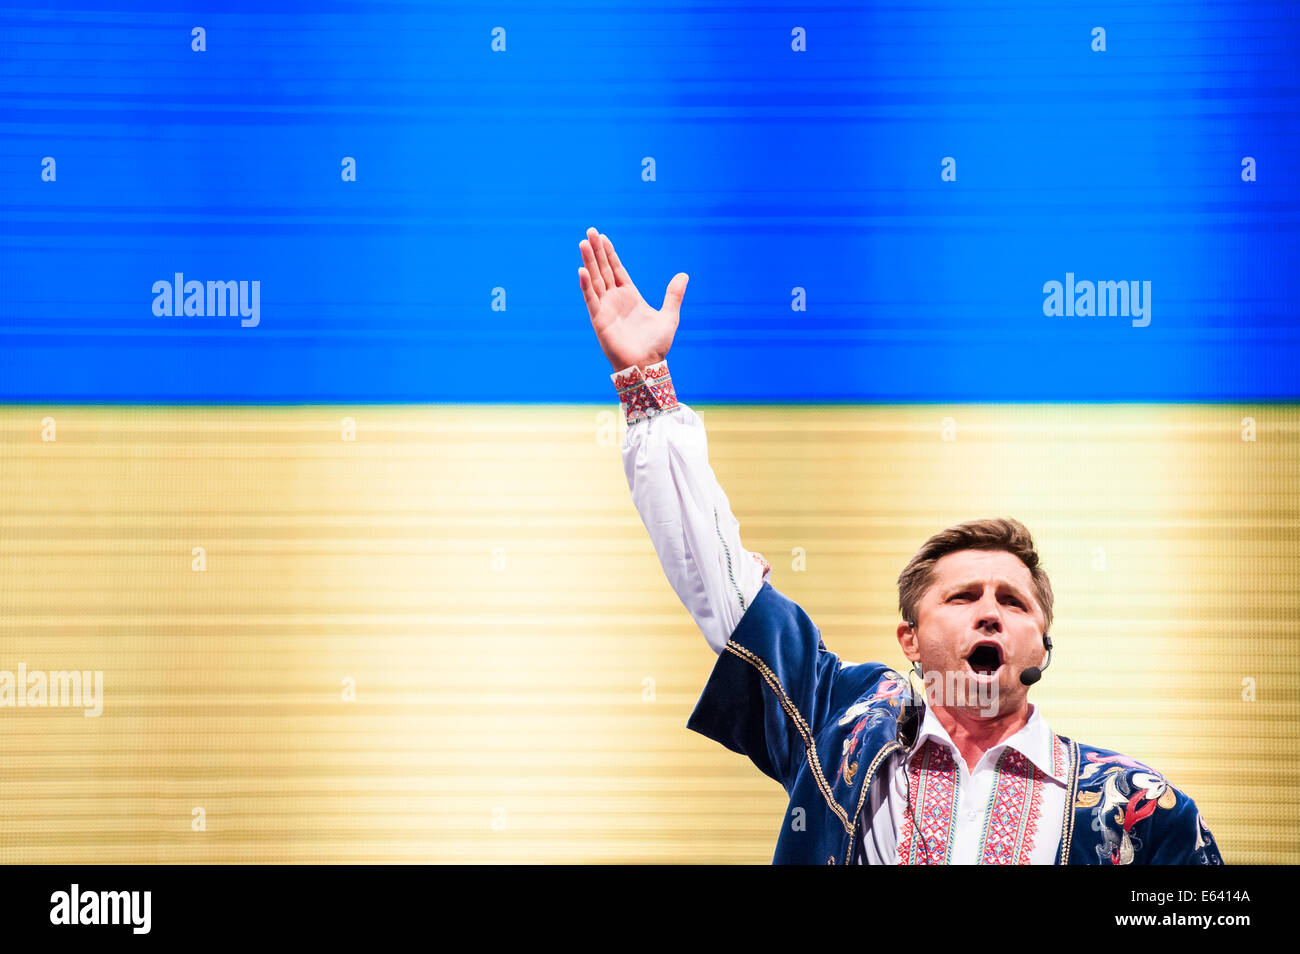 A Ukrainian folk singer with his right hand in the air, with Ukrainian flag in the background, performing at Folkart festival Stock Photo